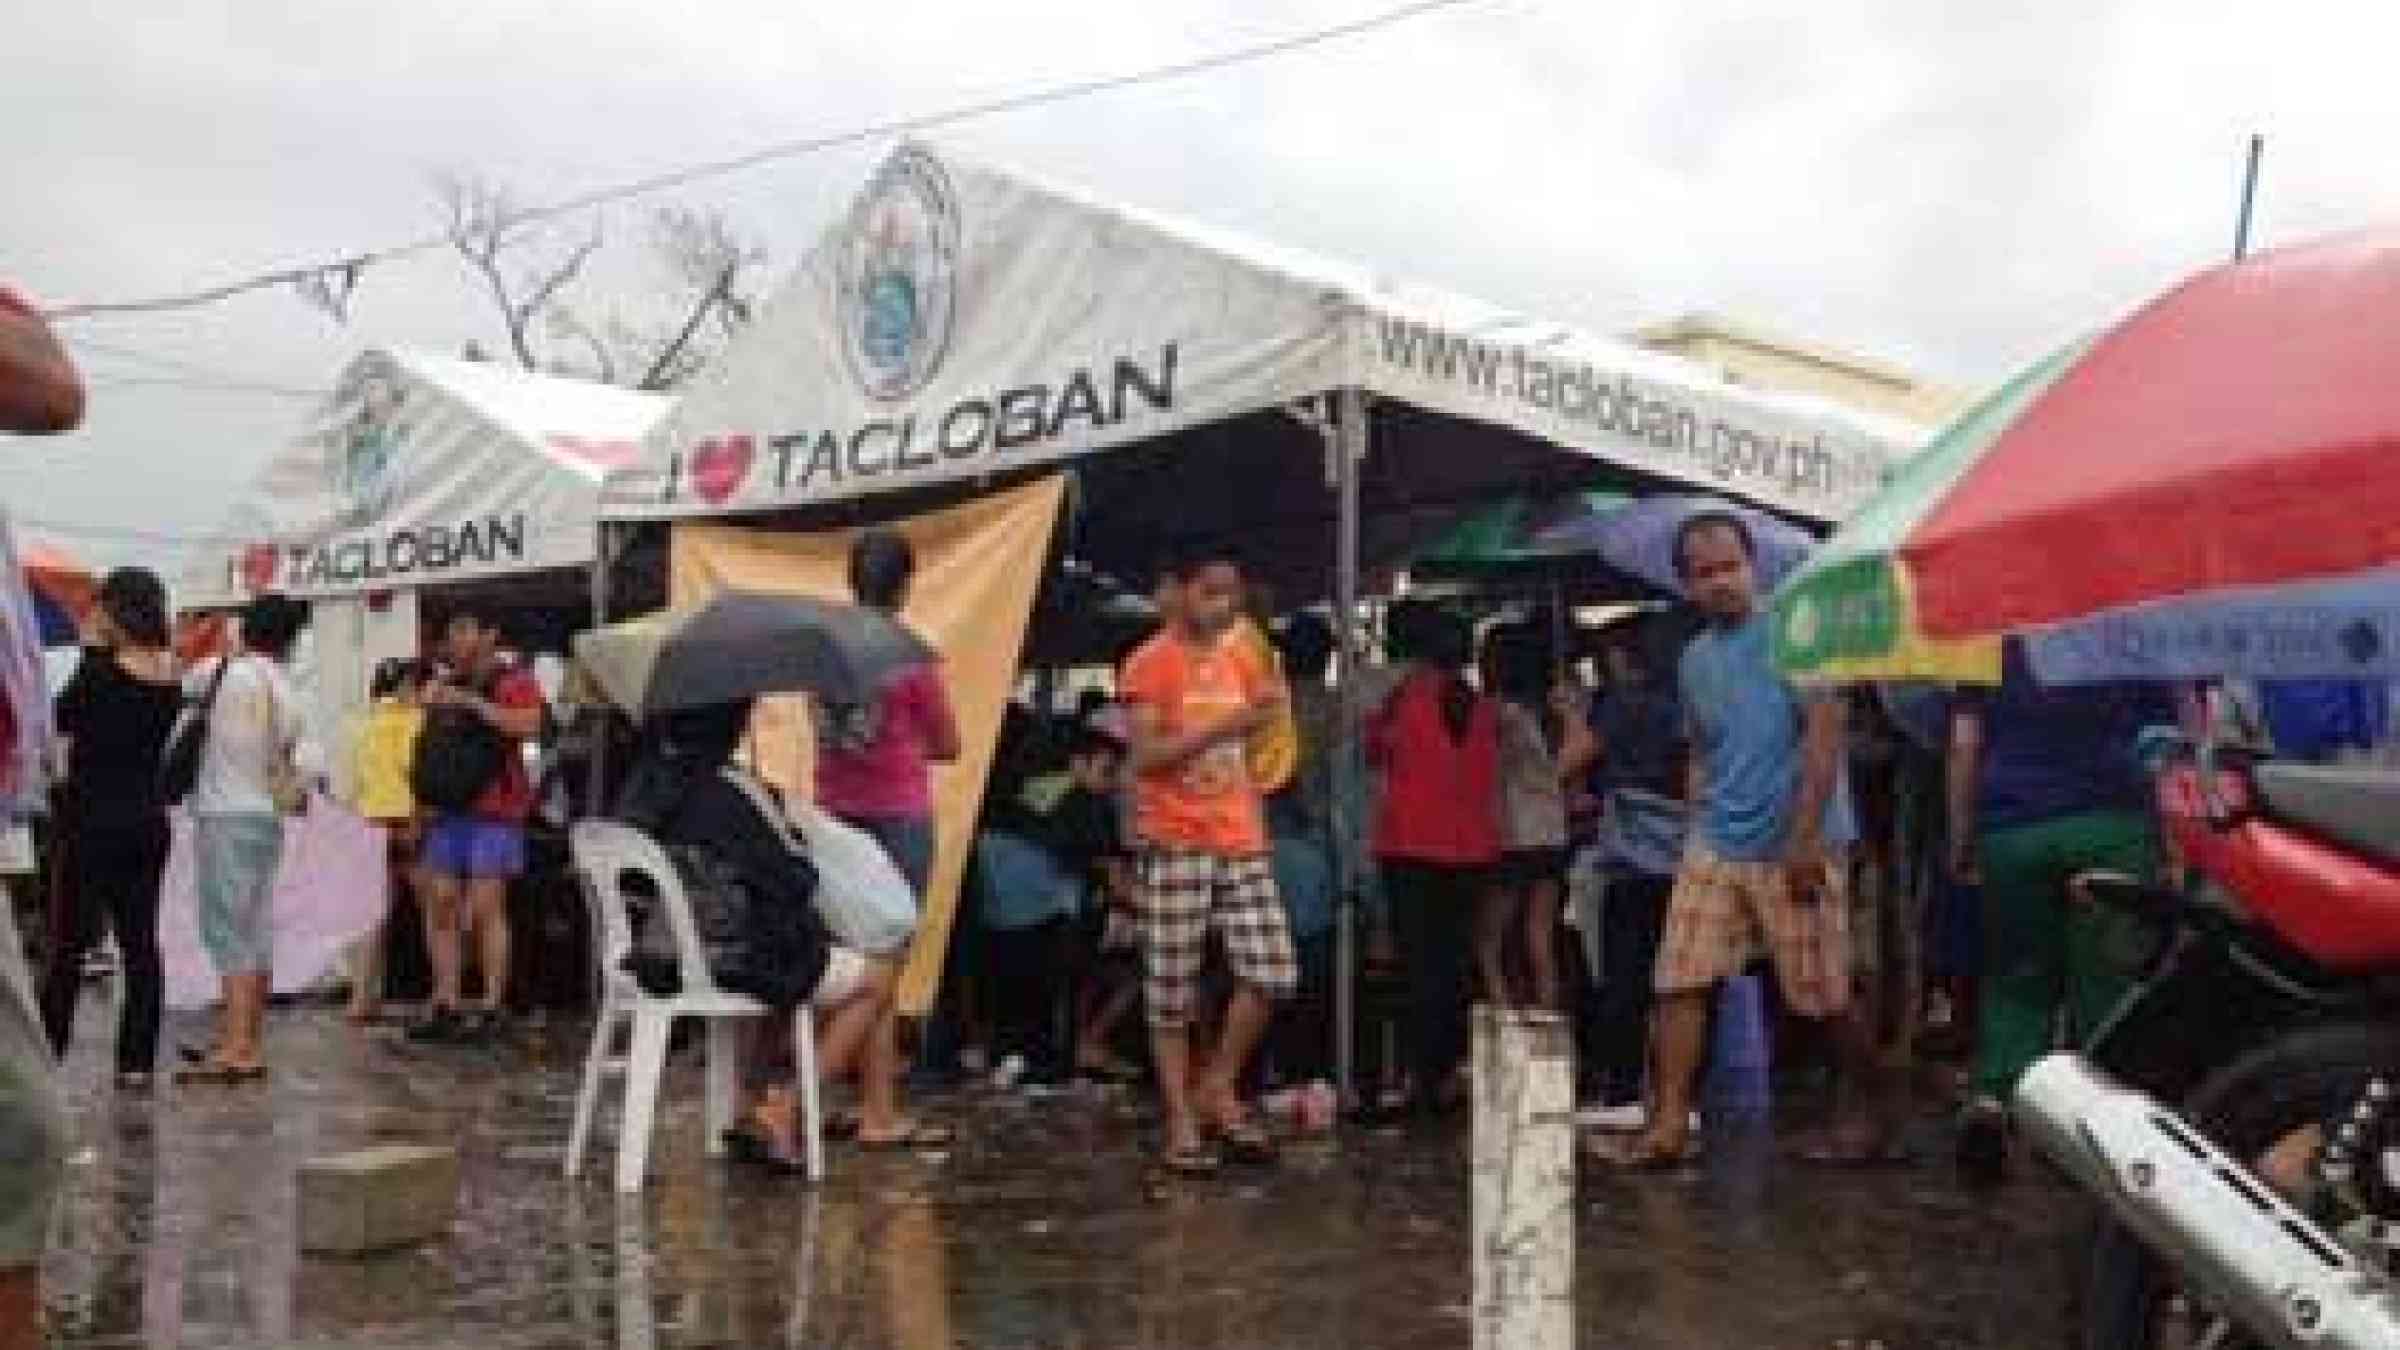 Tacloban is one of the hardest hit cities after Typhoon Haiyan, considered by some to be the strongest storm ever recorded upon landfall, slammed into the Philippines. (Photo: Plan Asia)